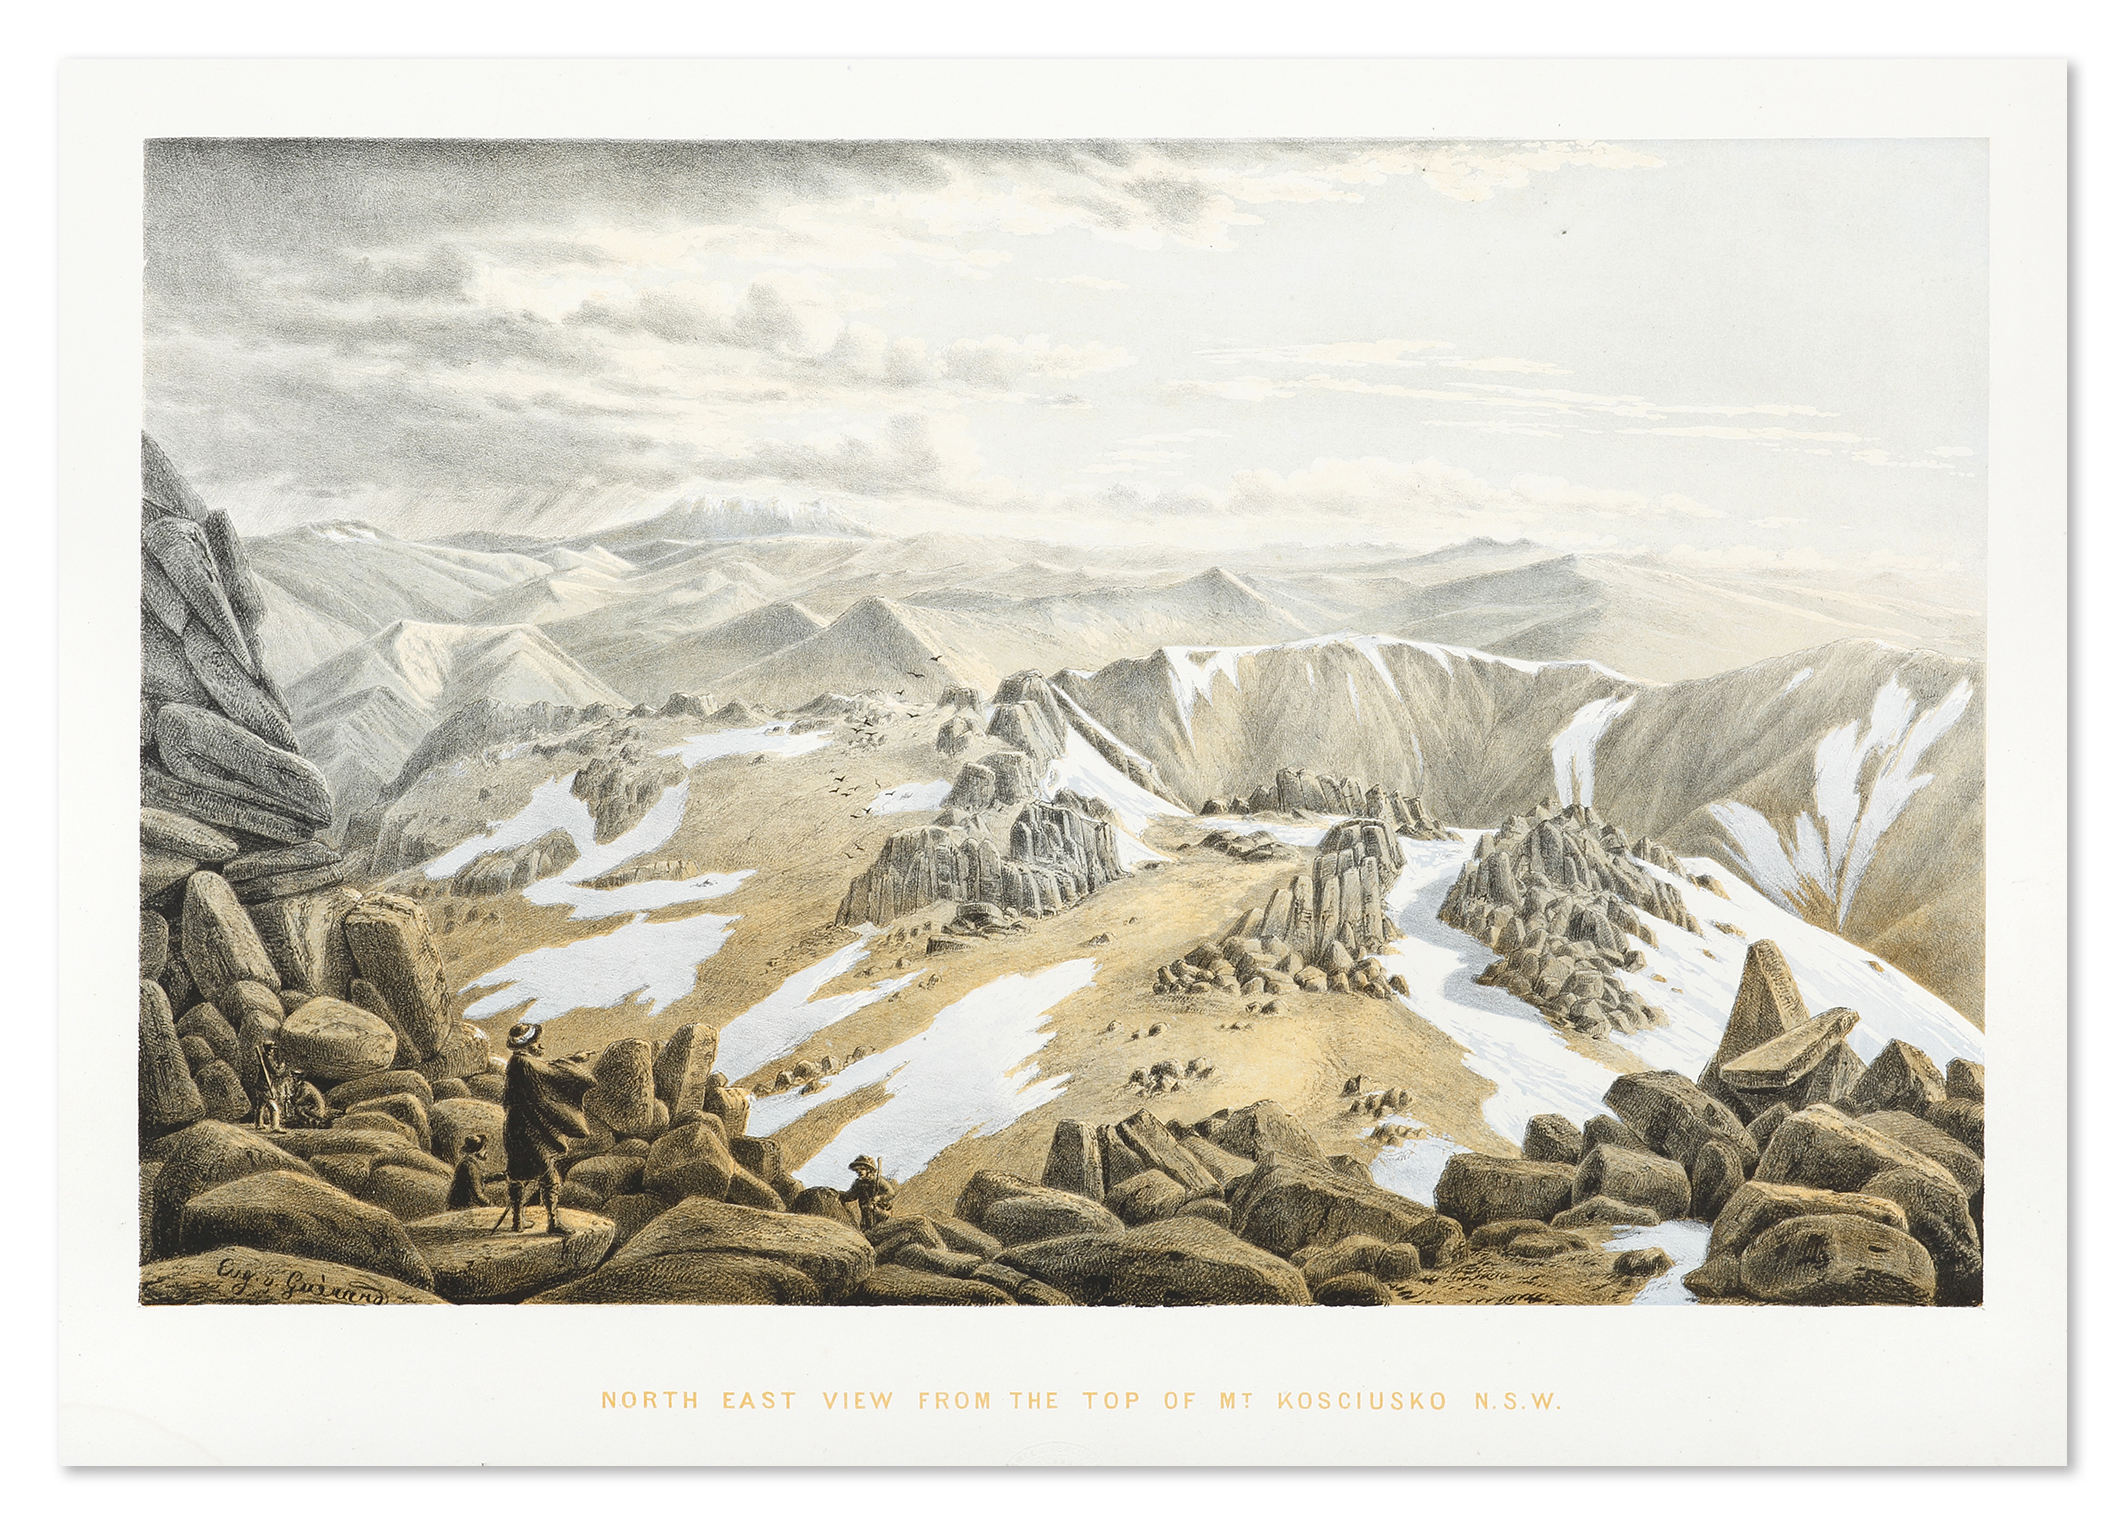 North East View from the Top of Mount Kosciusko, New South Wales. - Antique Print from 1867